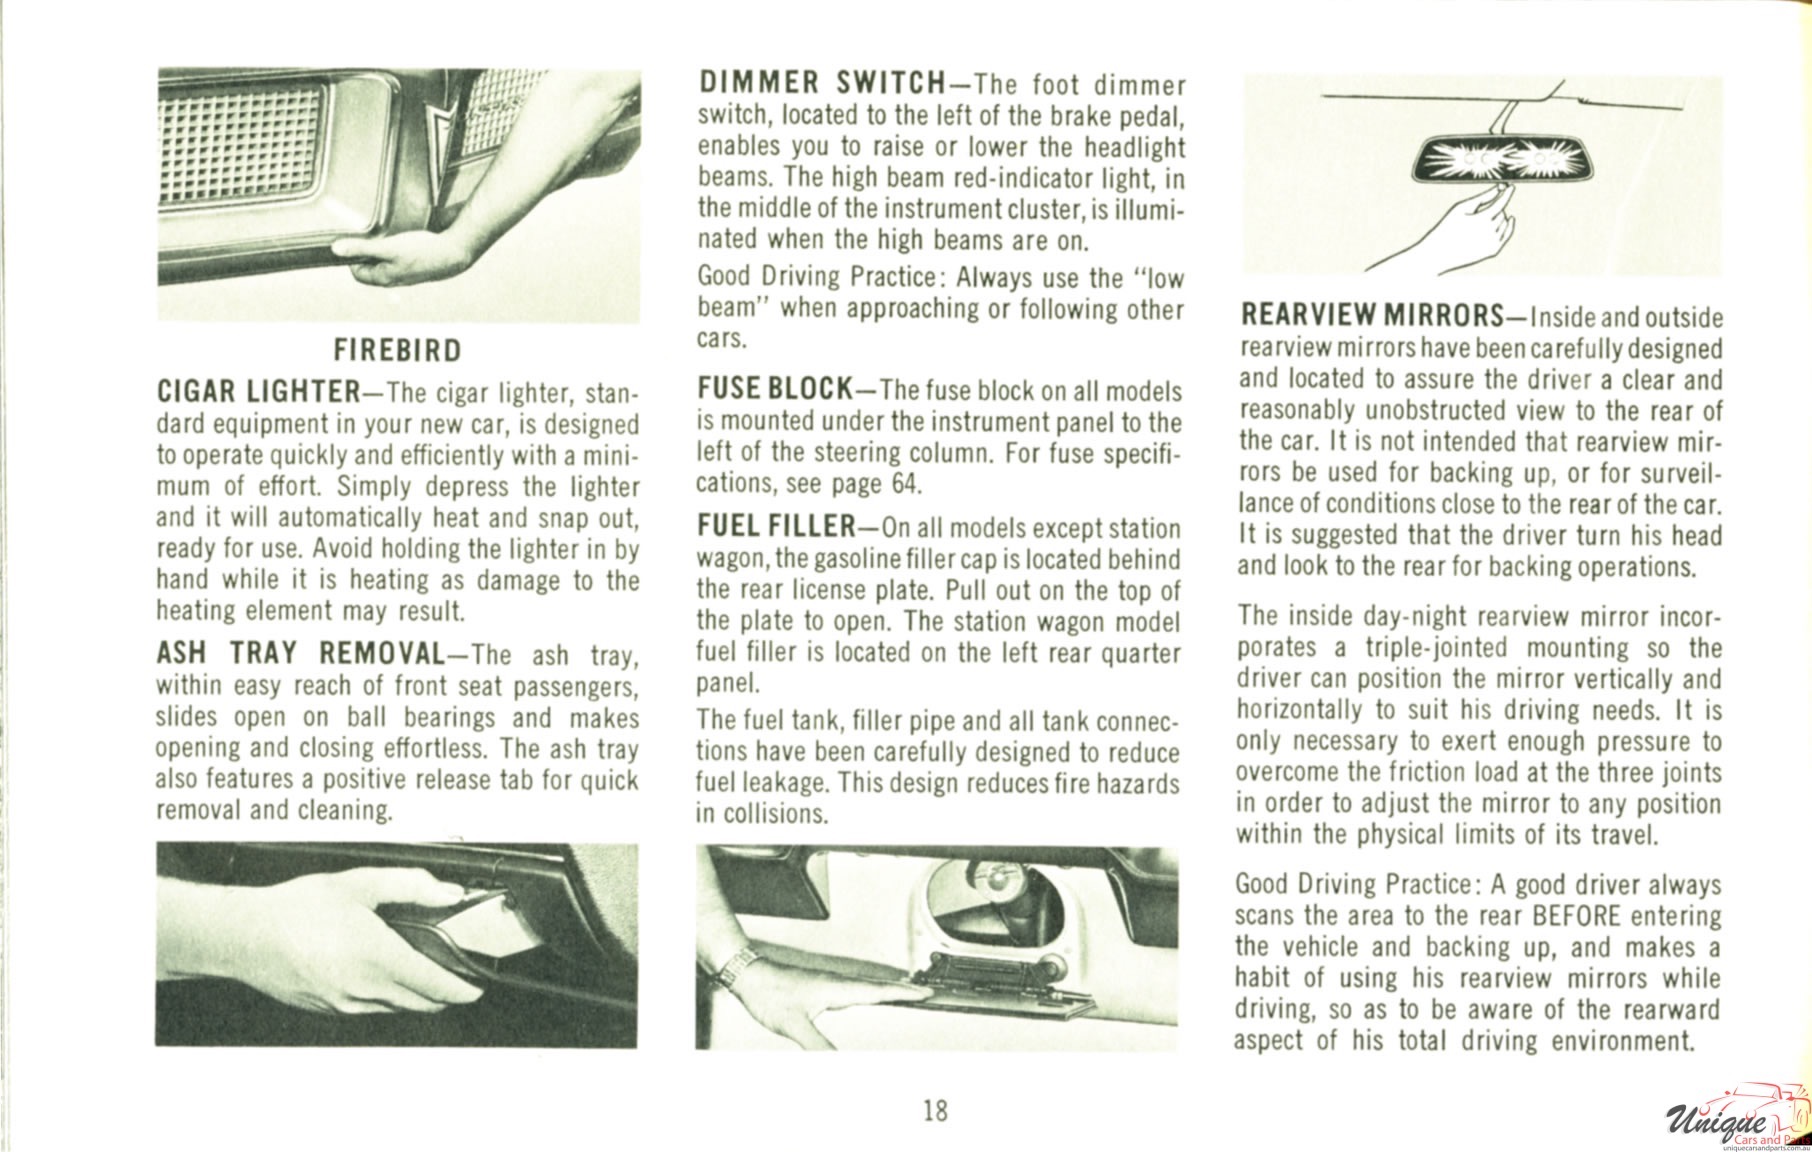 1969 Pontiac Owners Manual Page 39